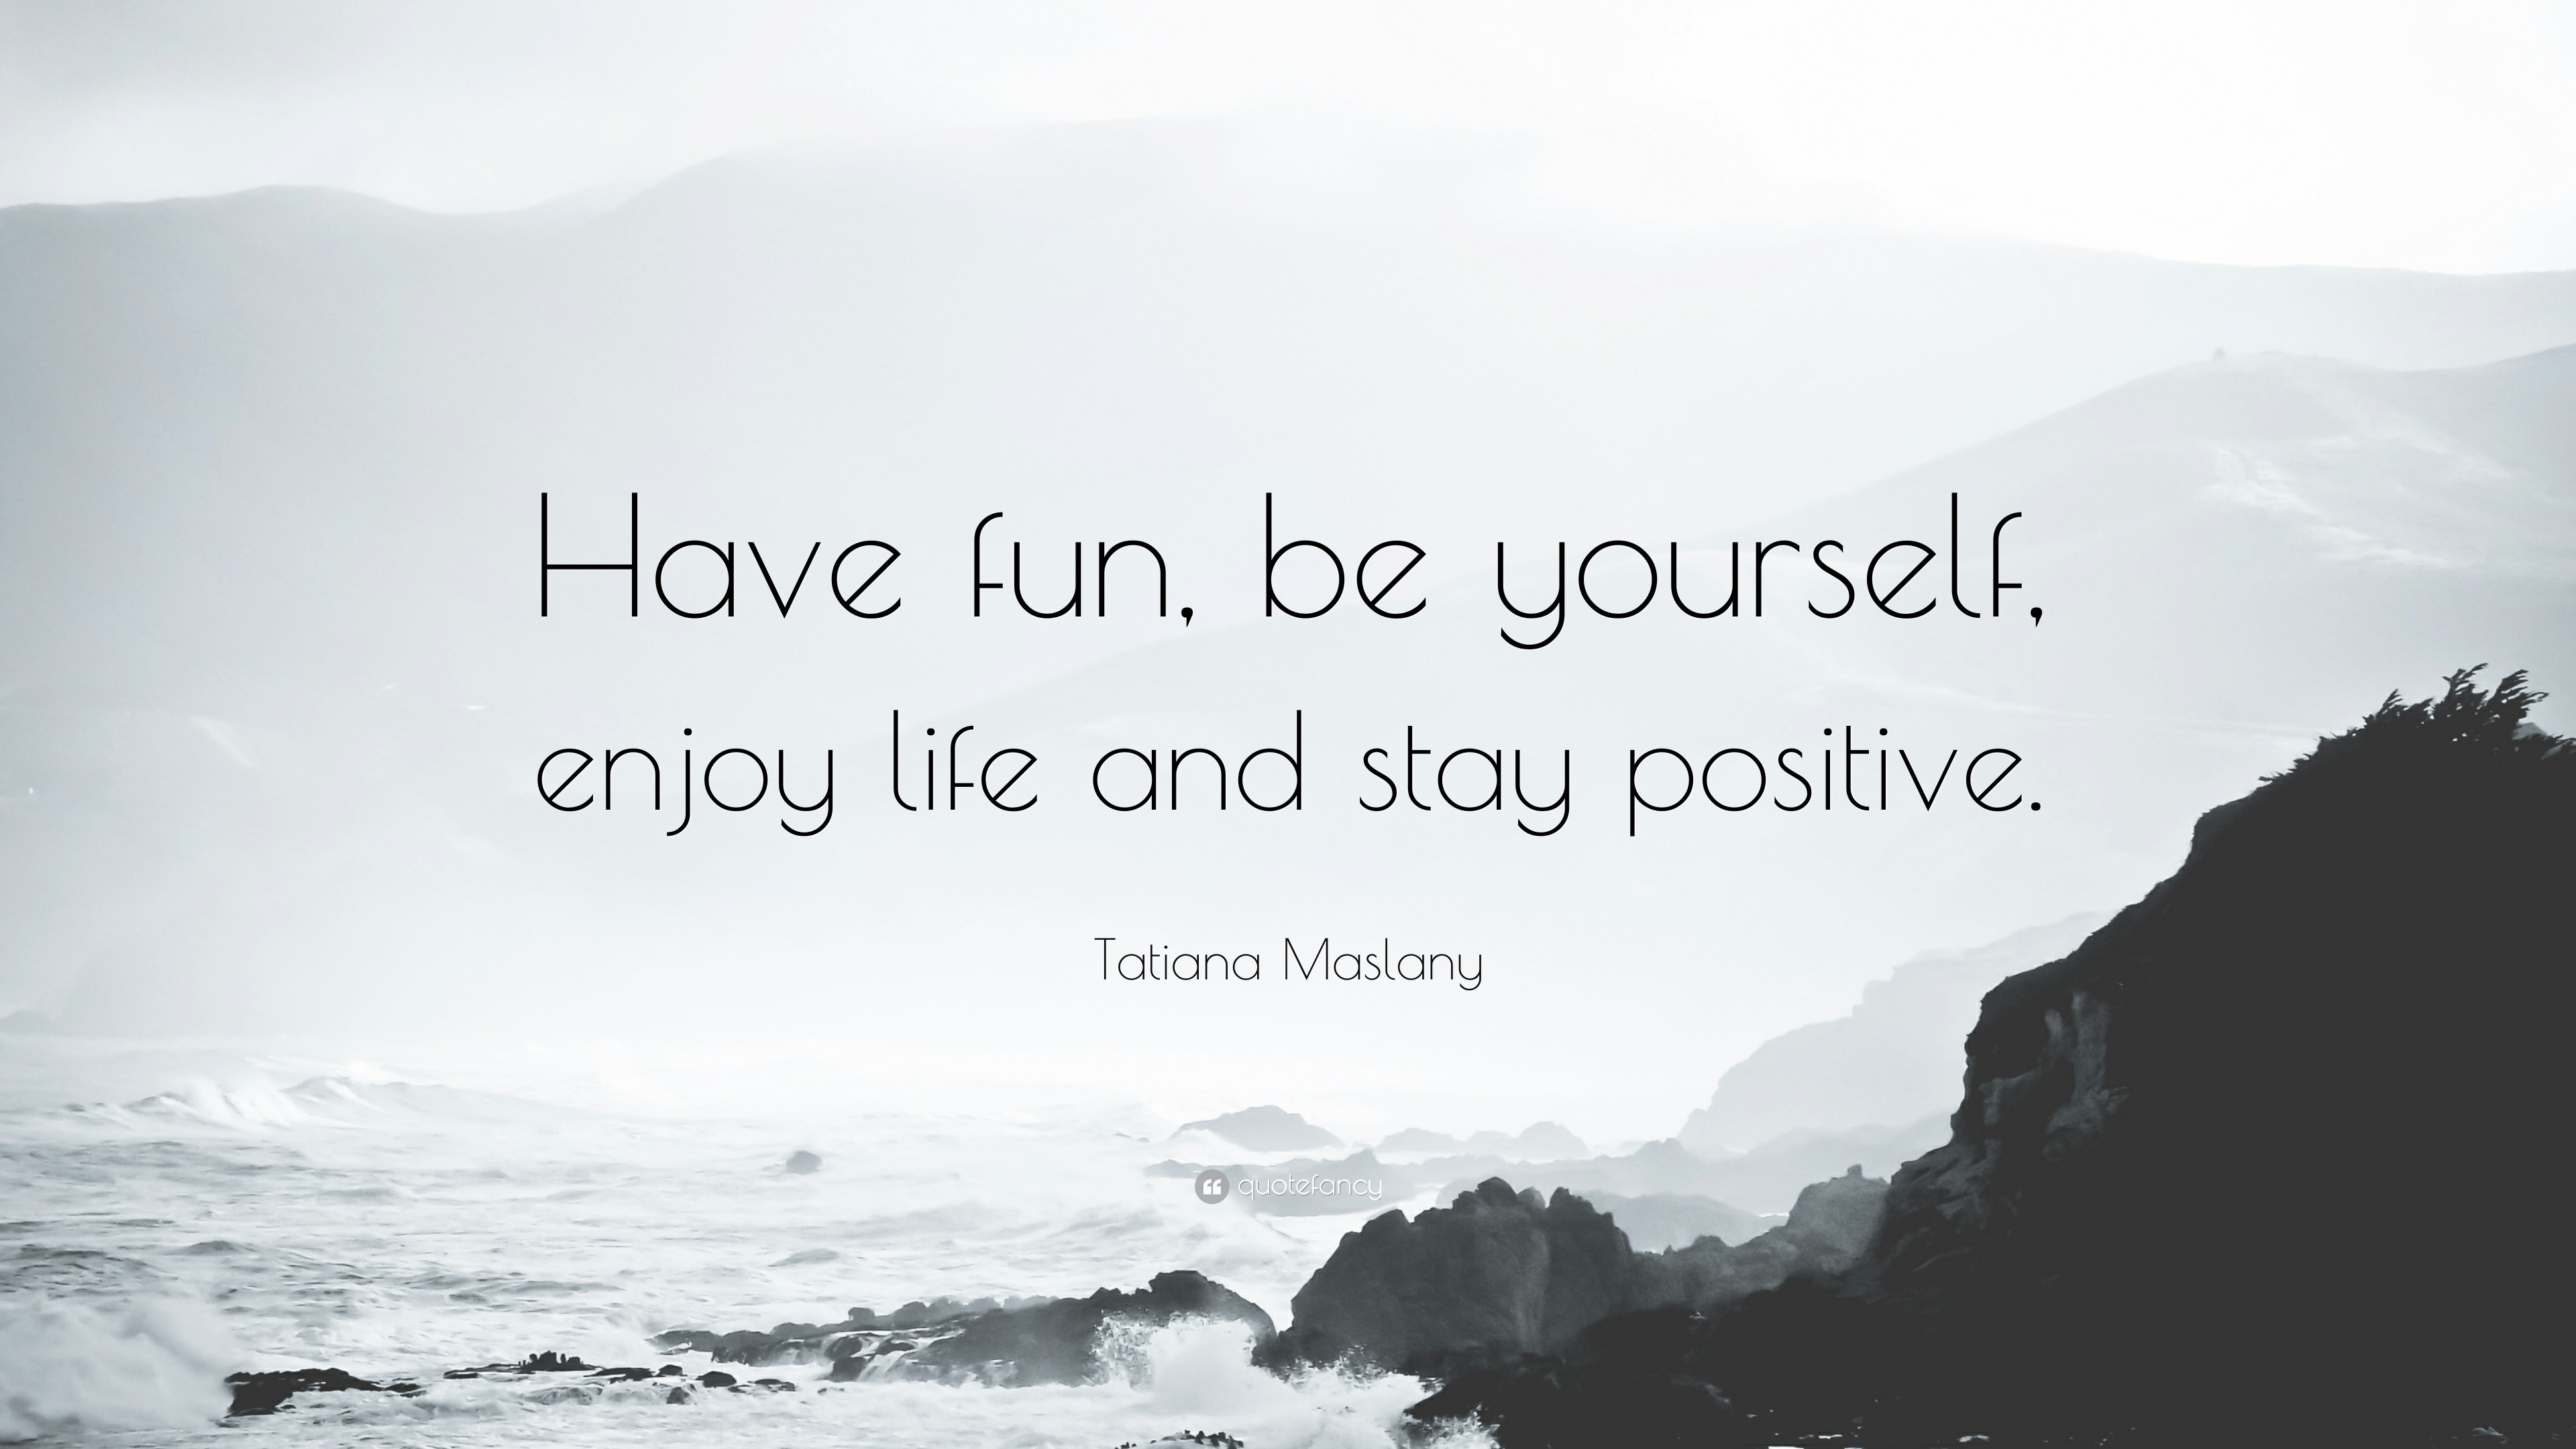 Tatiana Maslany Quote: “Have fun, be yourself, enjoy life and stay  positive.”